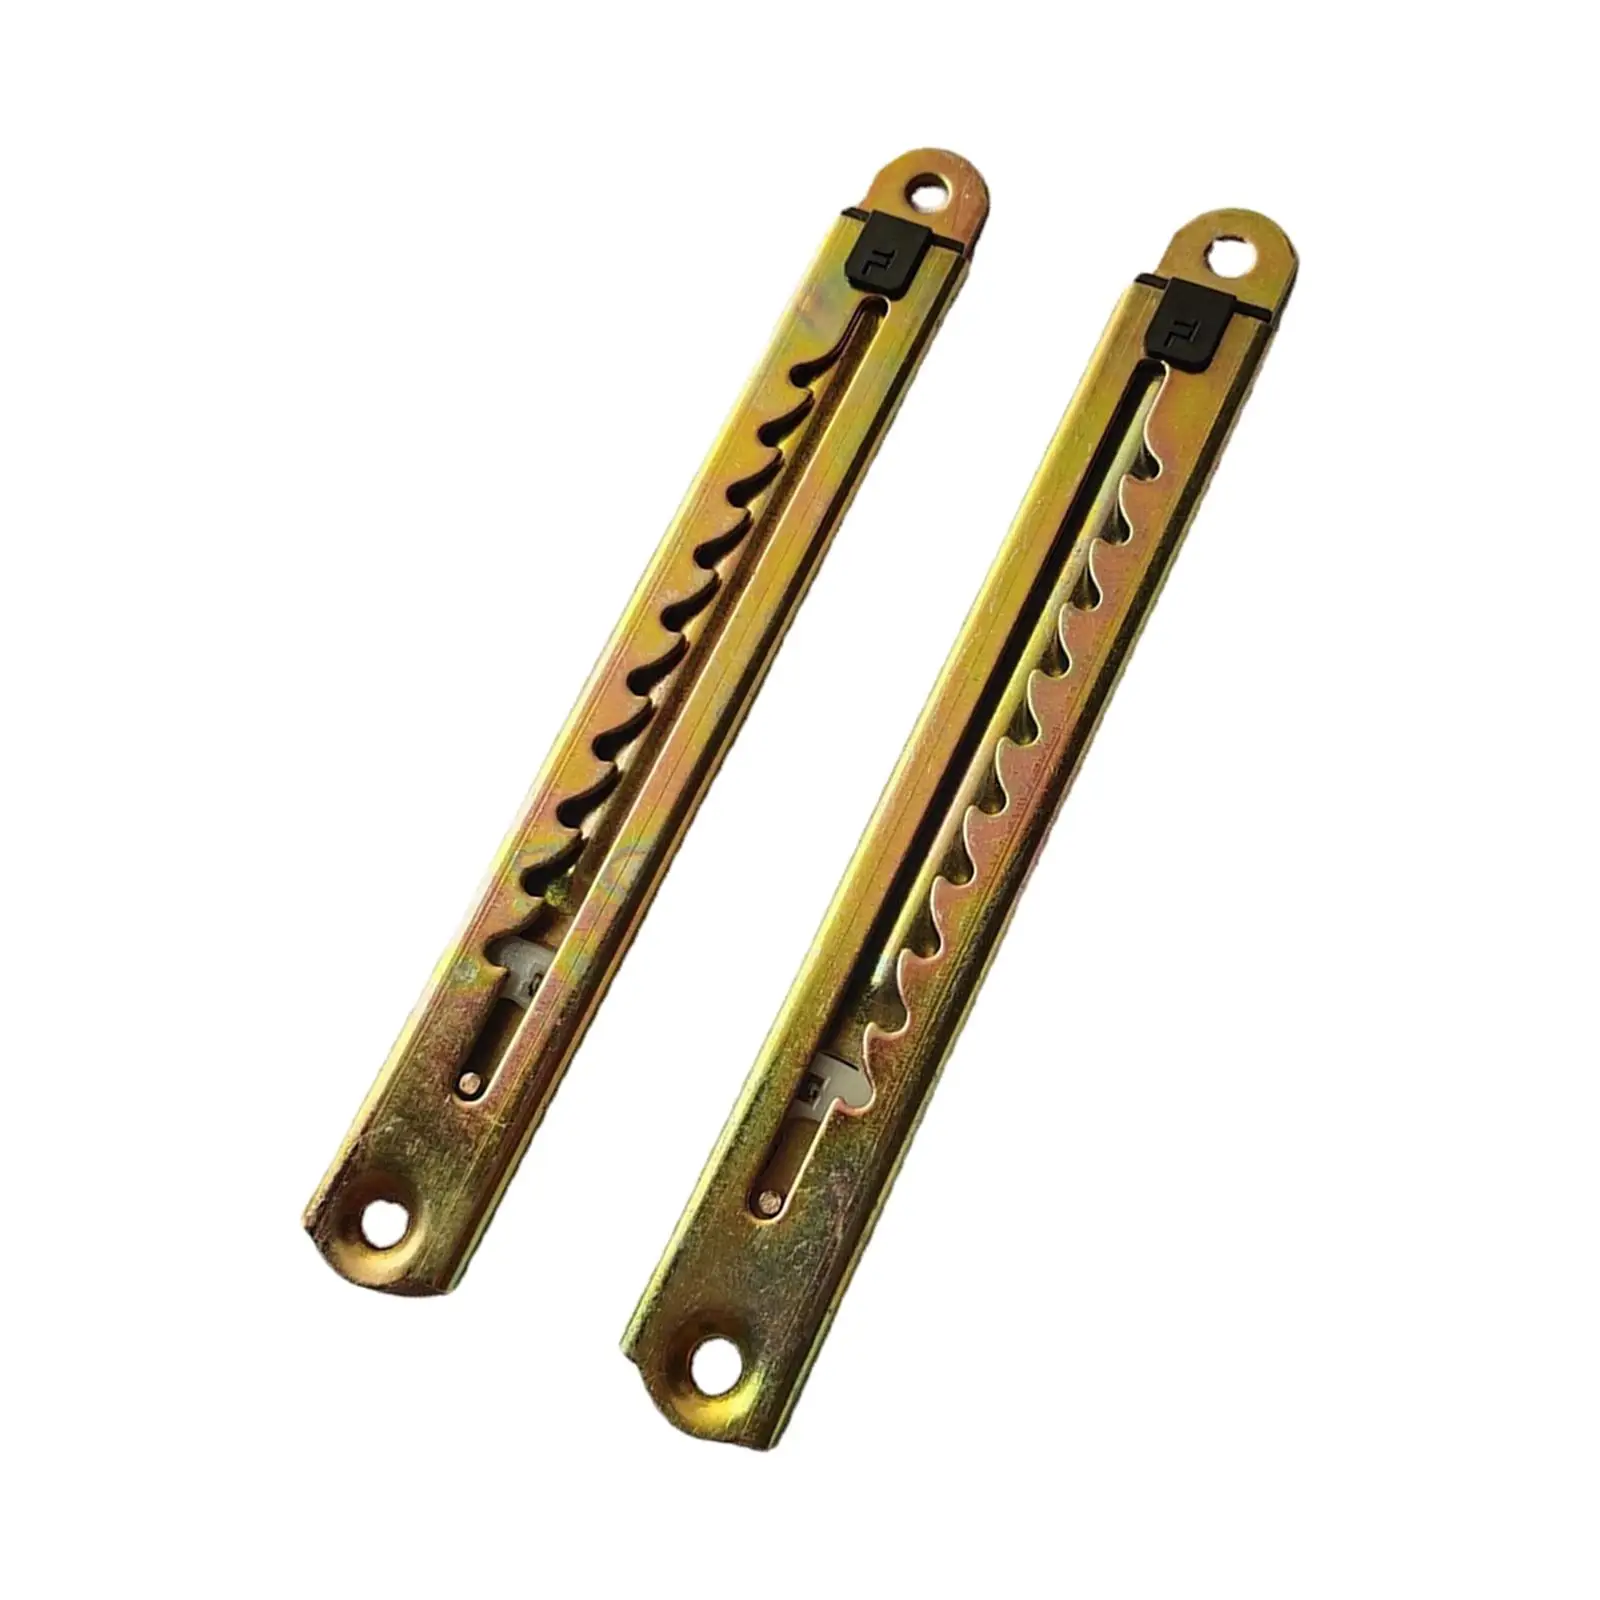 2 Pieces Lift Support Lifting Device Hardware Tools for Bed Door Furniture